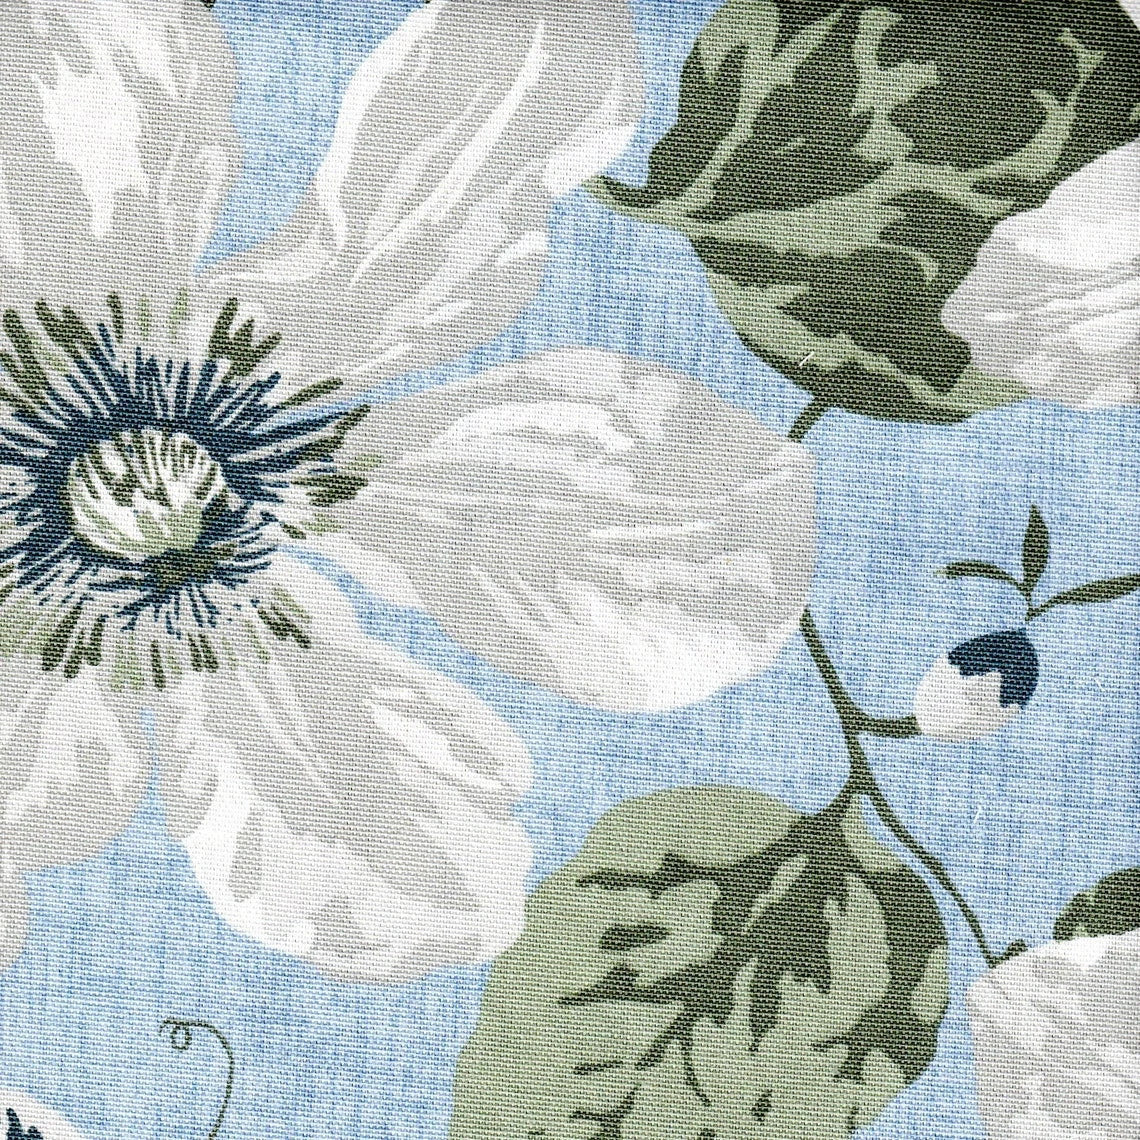 tailored valance in nelly antique blue floral, large scale